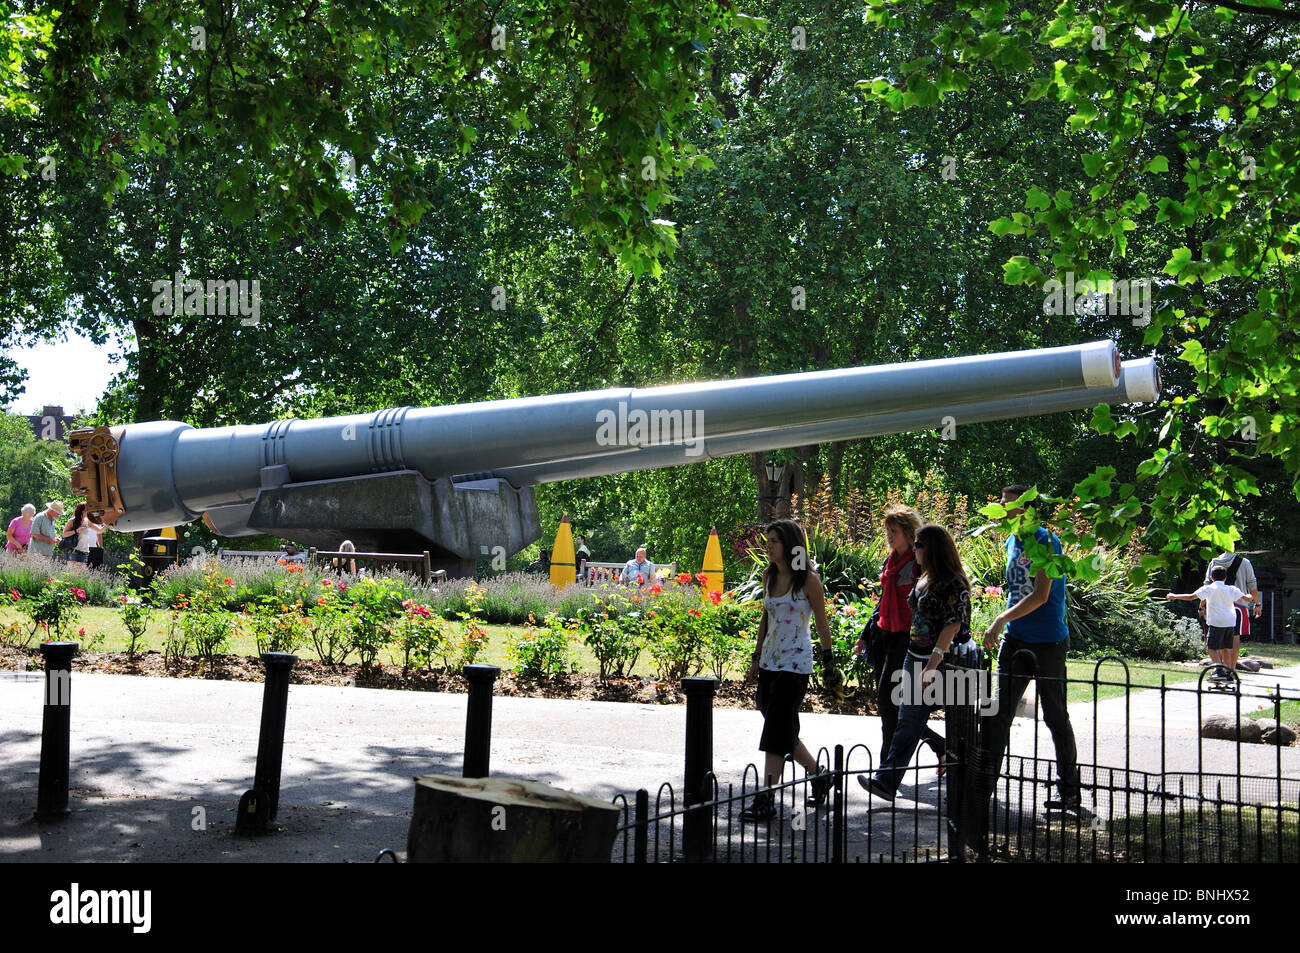 15 canons, Imperial War Museum, Lambeth Road, le London Borough of Southwark, Londres, Angleterre, Royaume-Uni Banque D'Images